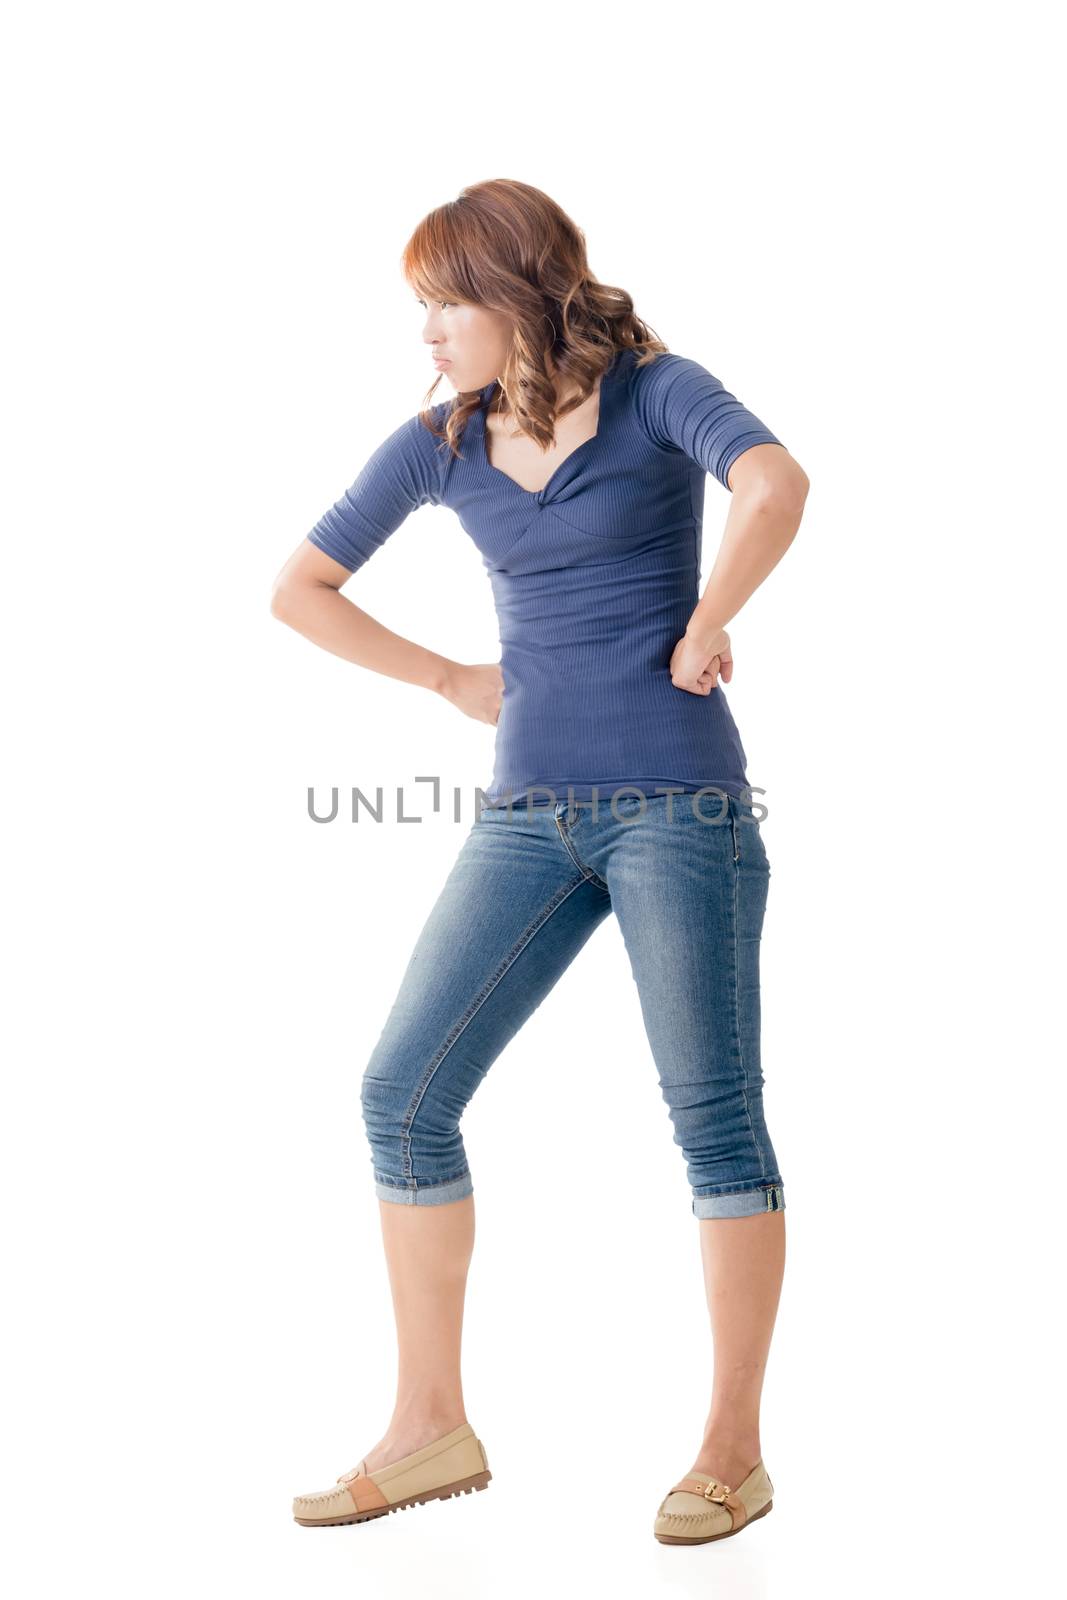 Fighting Asian woman, full length portrait isolated.